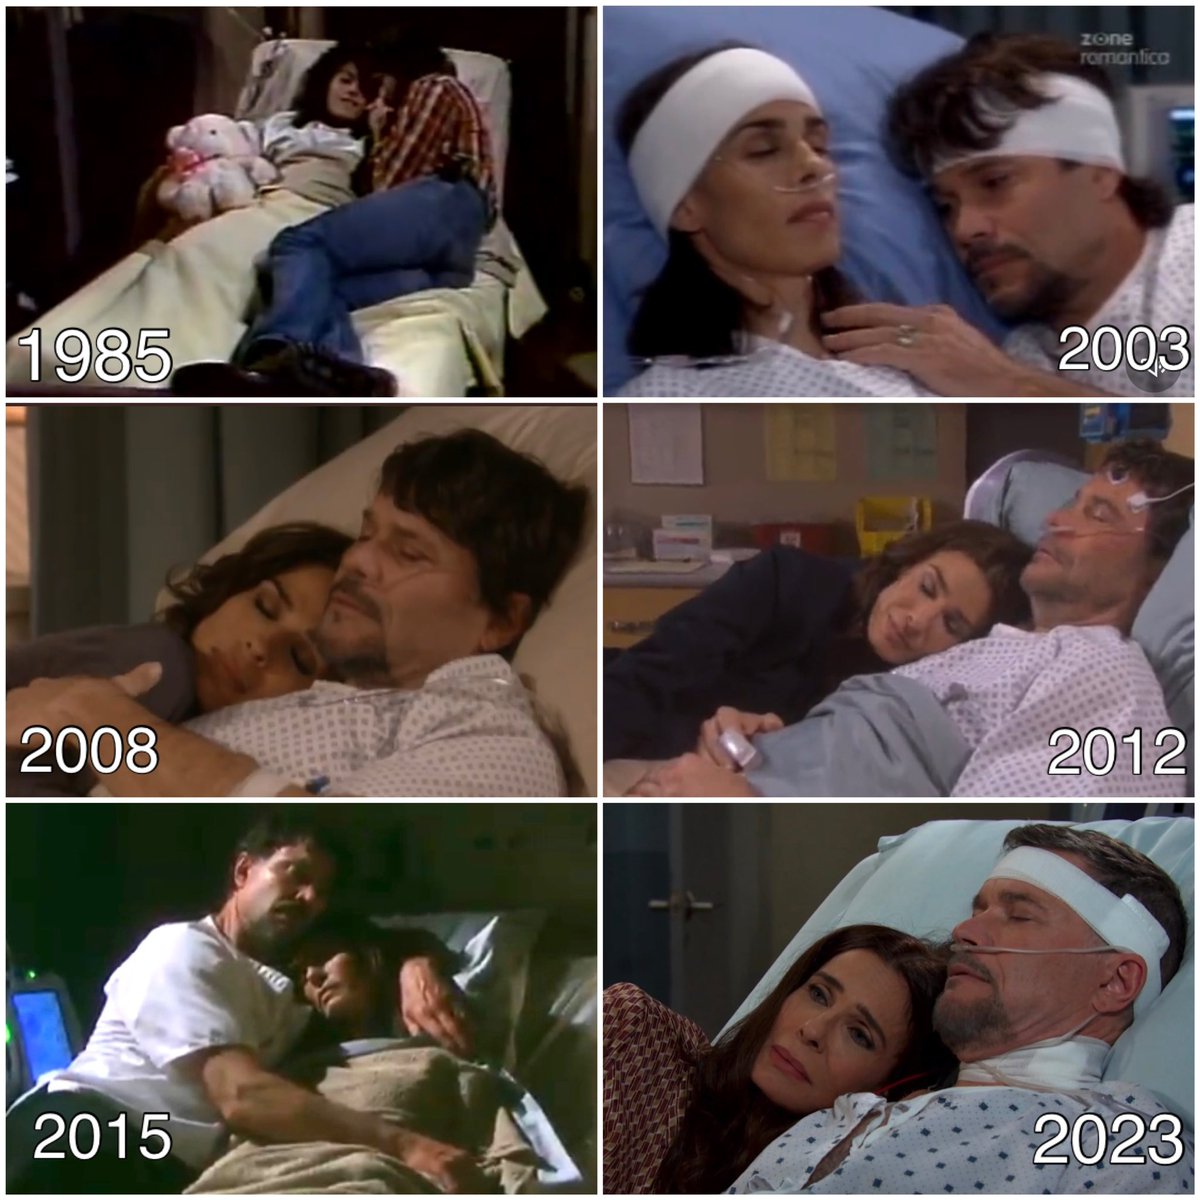 You need 40 years of history to show this kind of parallel.
#Bope #Bope40 #BoandHope #Days #DaysofourLives #DOOL